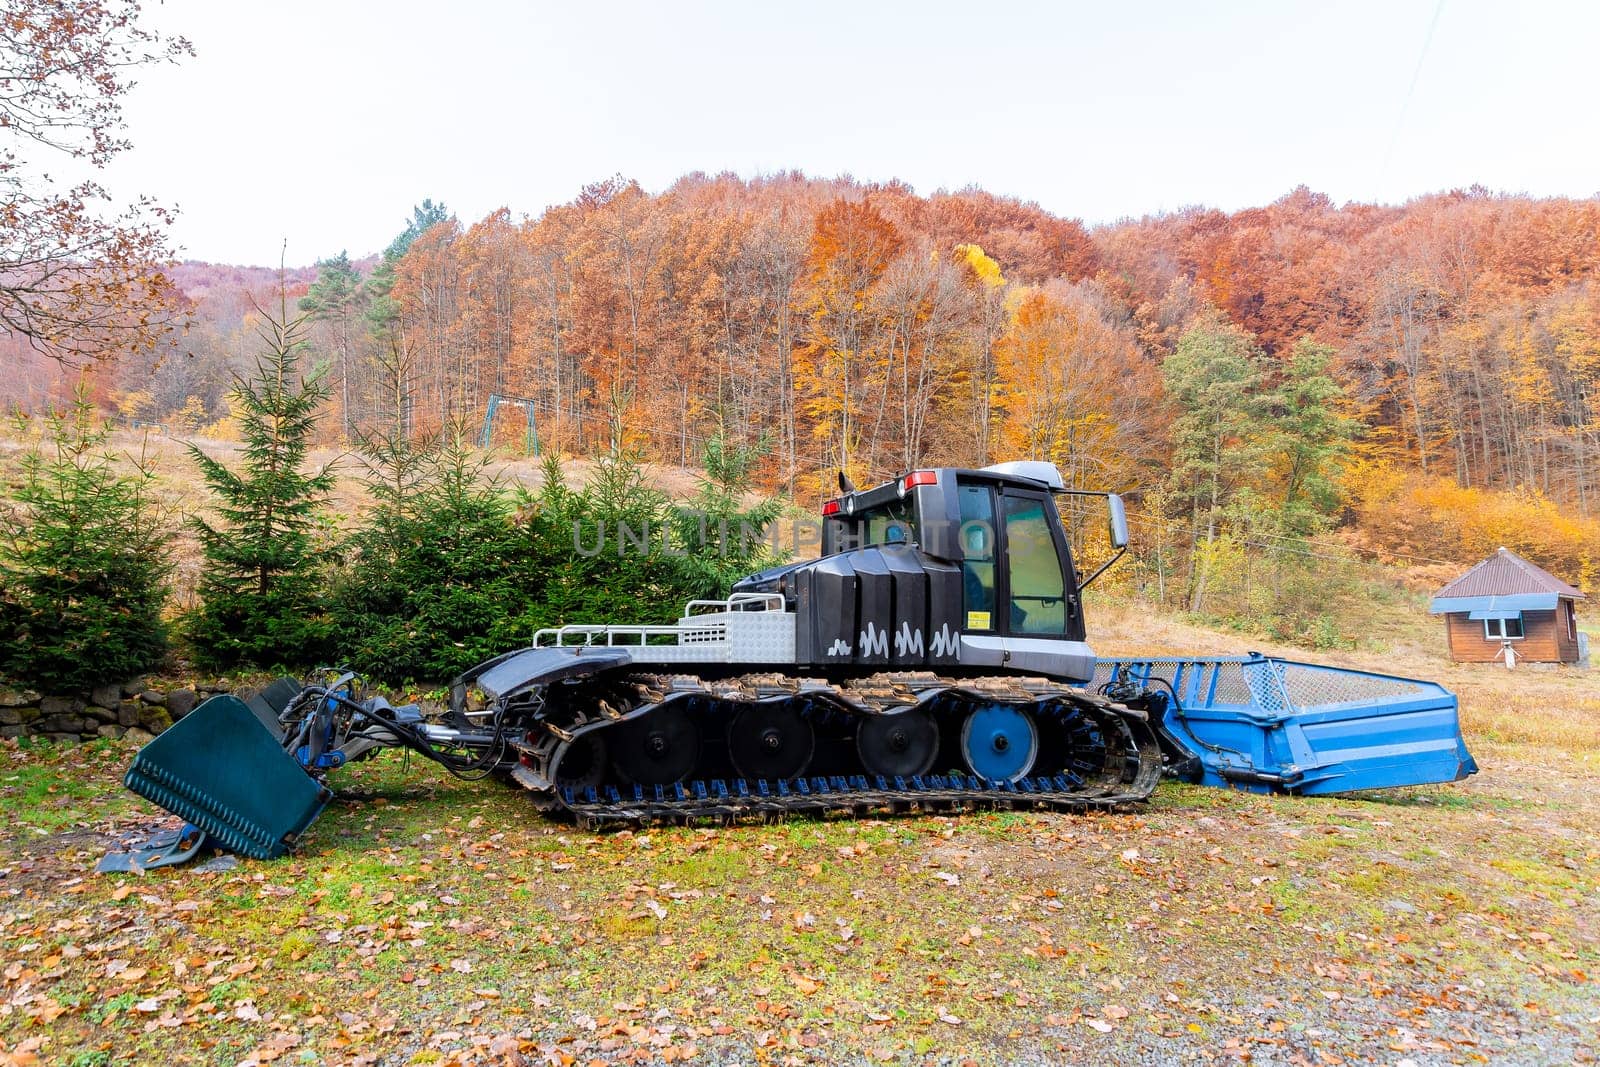 Crawler tractor is standing near the forest in the autumn season. Equipment for collecting snow in mountainous terrain.